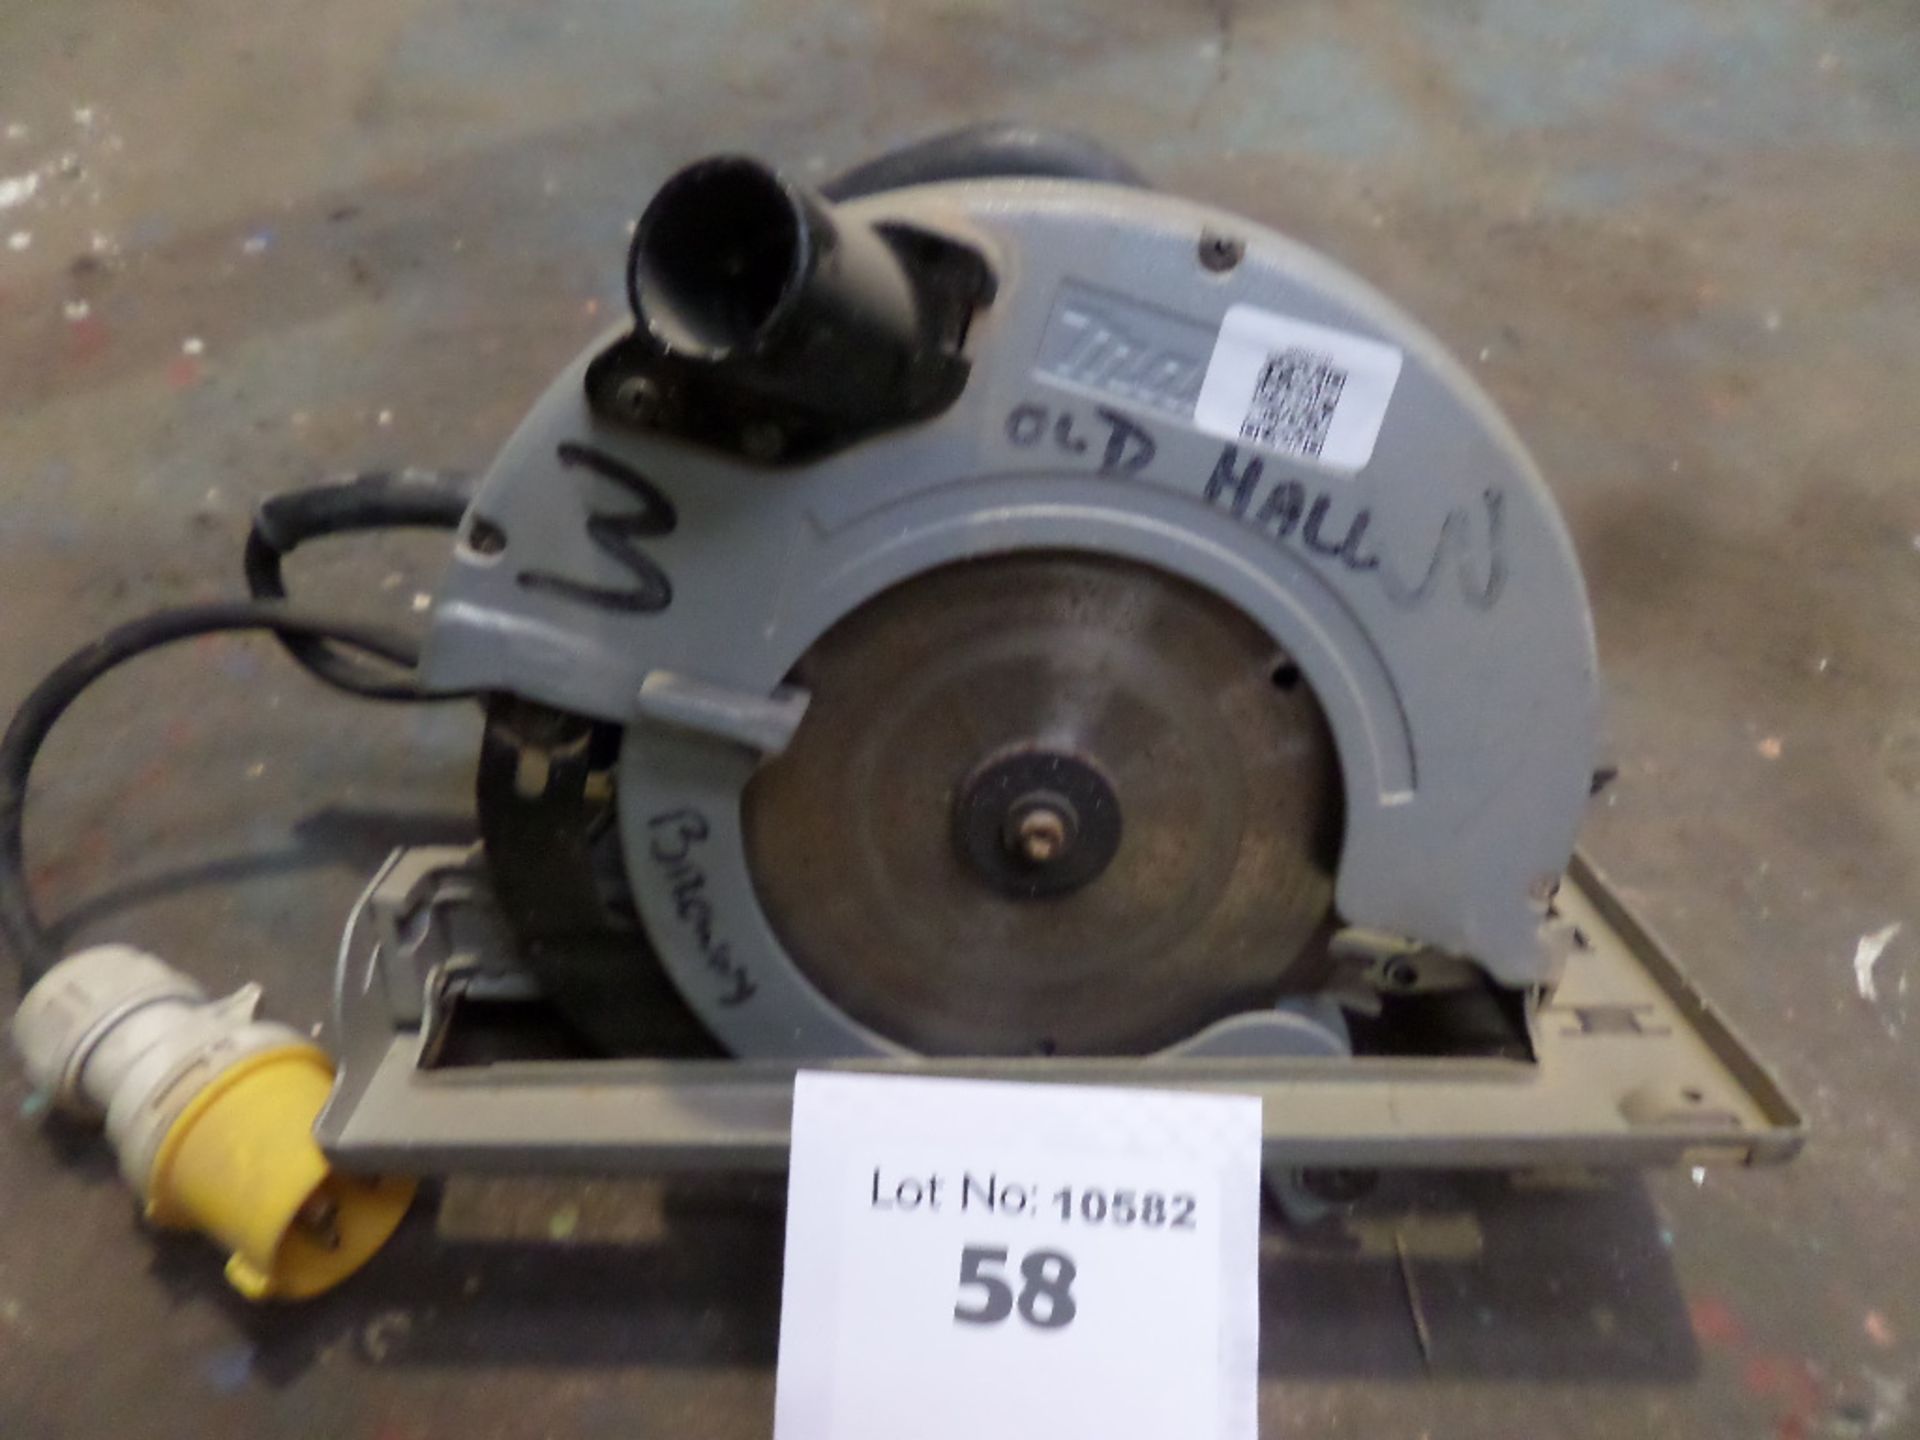 MAKITA 5703R {023095} CIRCULAR SAW 110V 110v 16amp connection and comes with blade. Tested and is wo